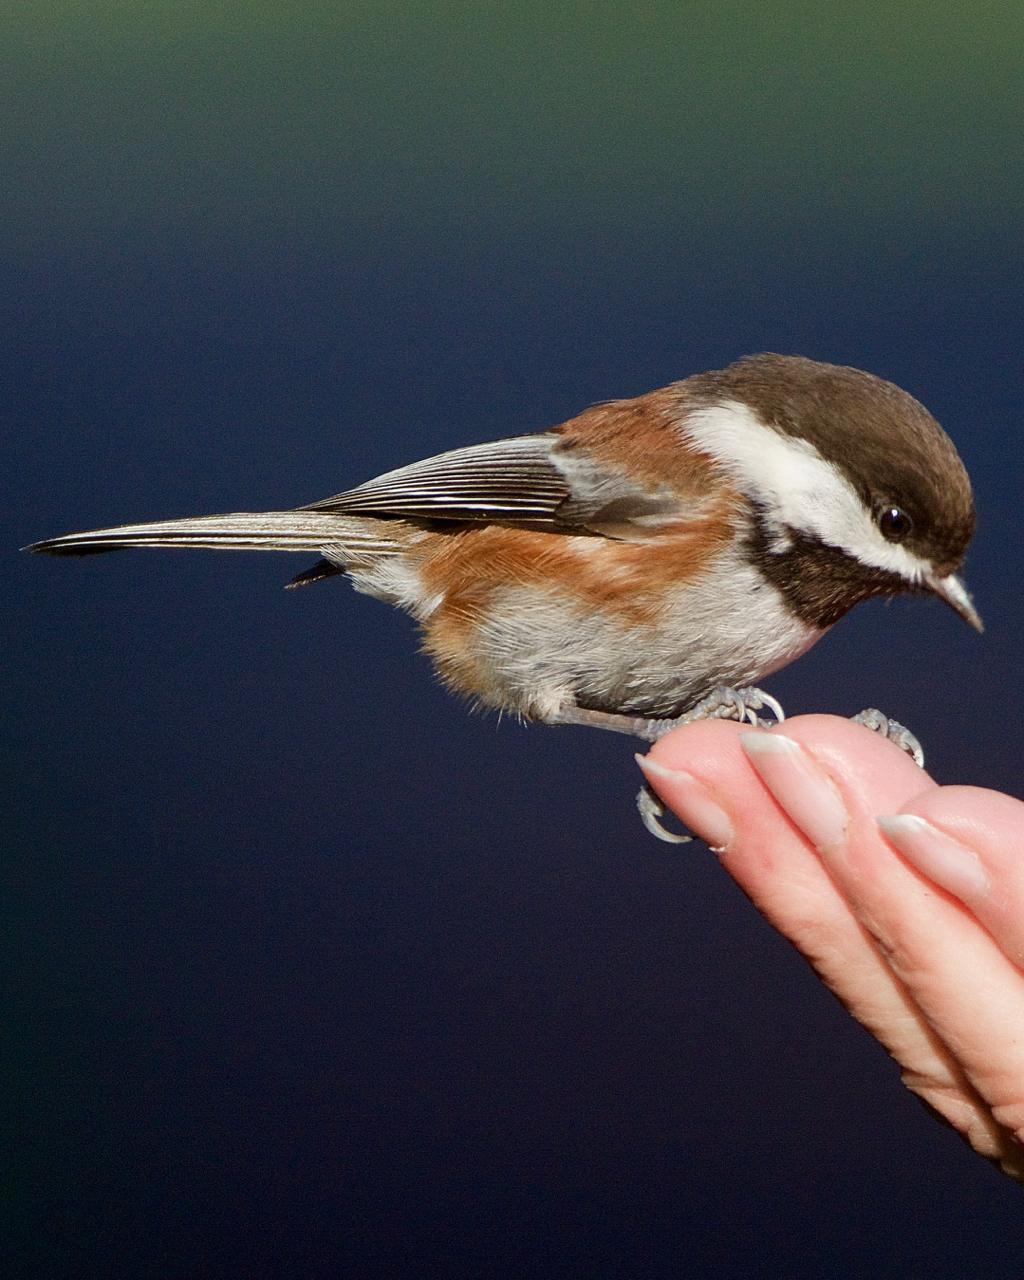 Chestnut-backed Chickadee Photo by Brian Avent